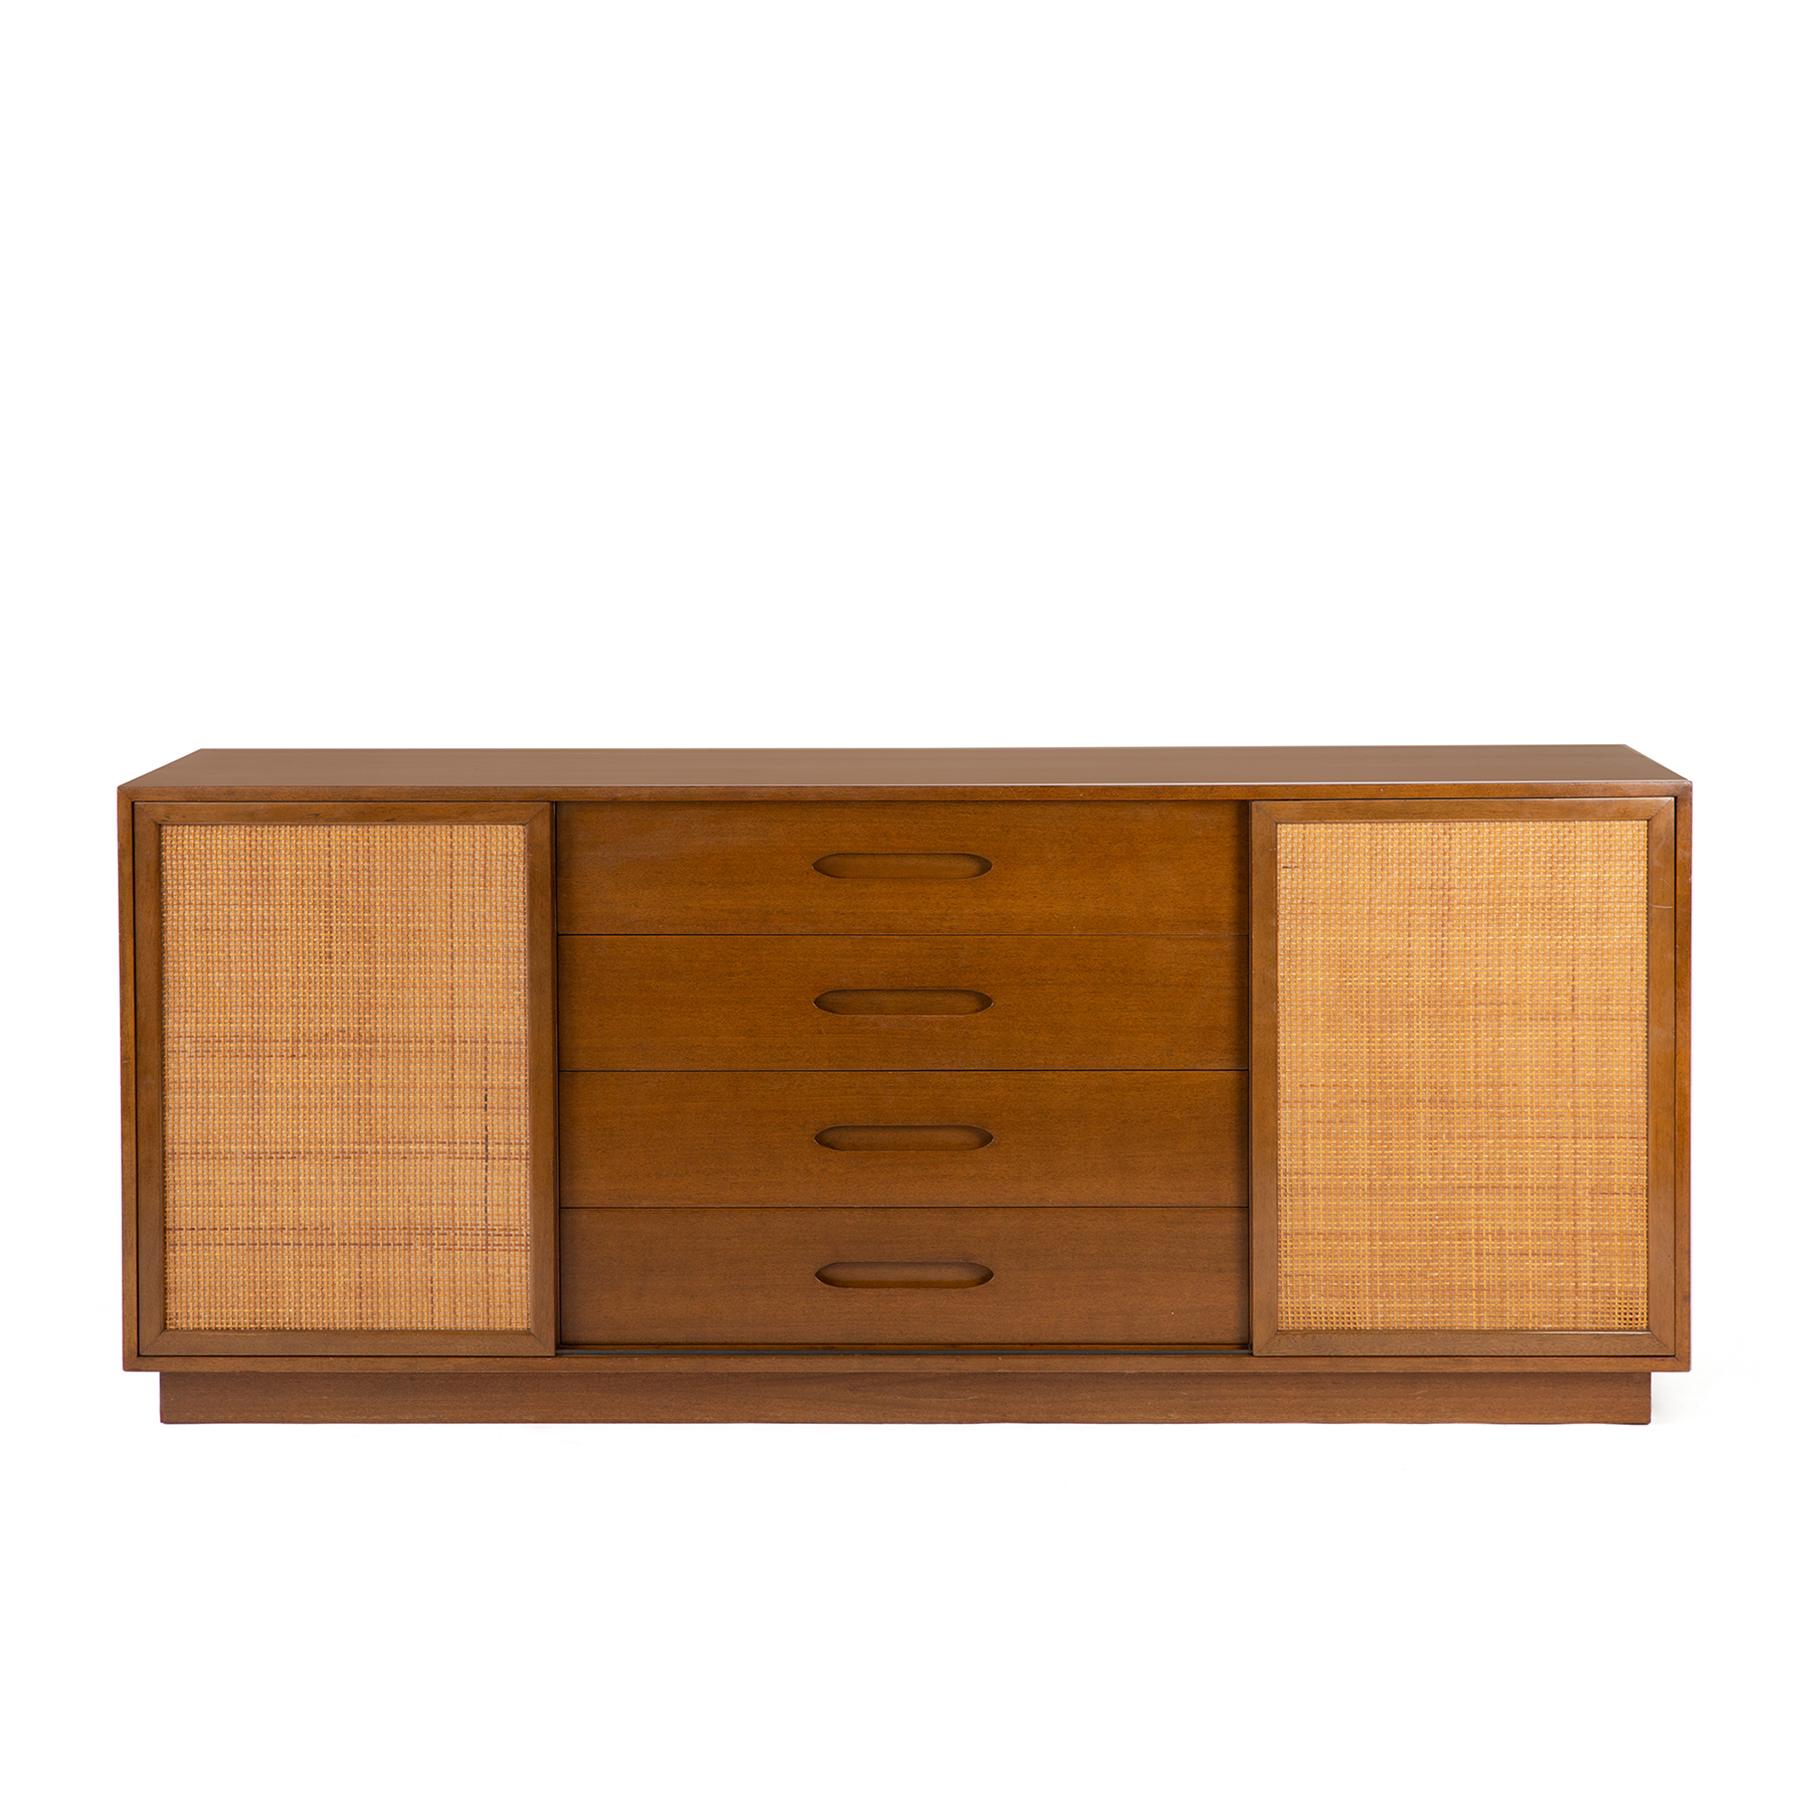 Stately early 1960s sideboard in mahogany by Harvey Probber. This all original chest features four center drawers and two sliding doors with inset caning. The interior has white lacquered drawers on one side and pullout / pull-out shelves on the